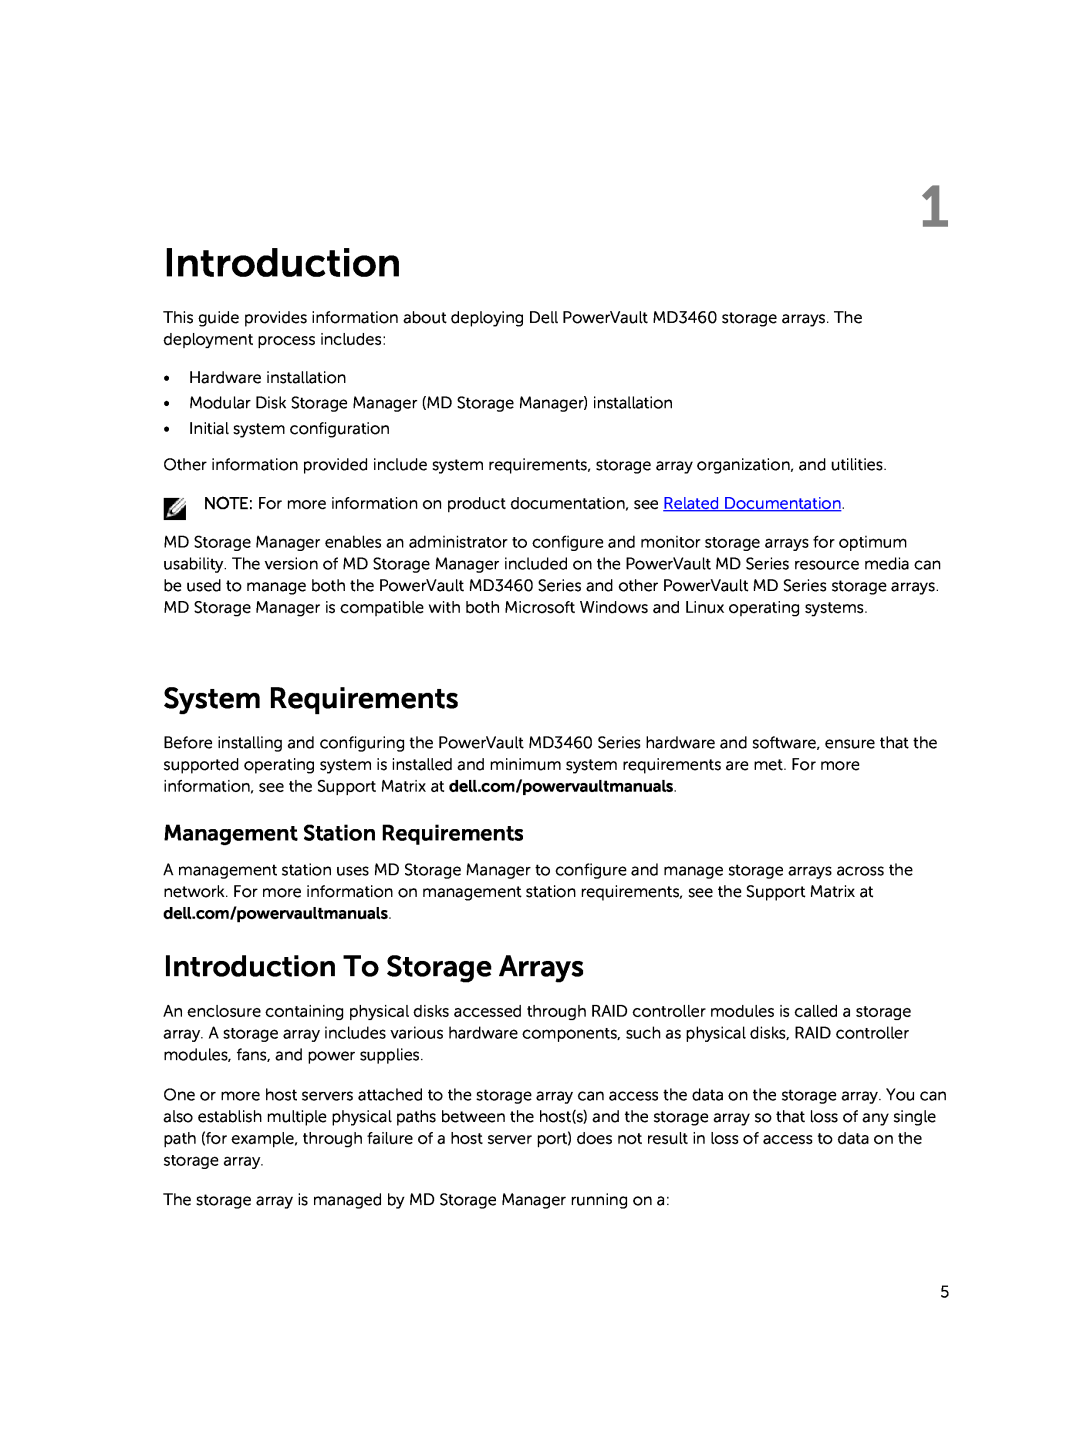 Dell MD3460 manual System Requirements, Introduction To Storage Arrays, Management Station Requirements 